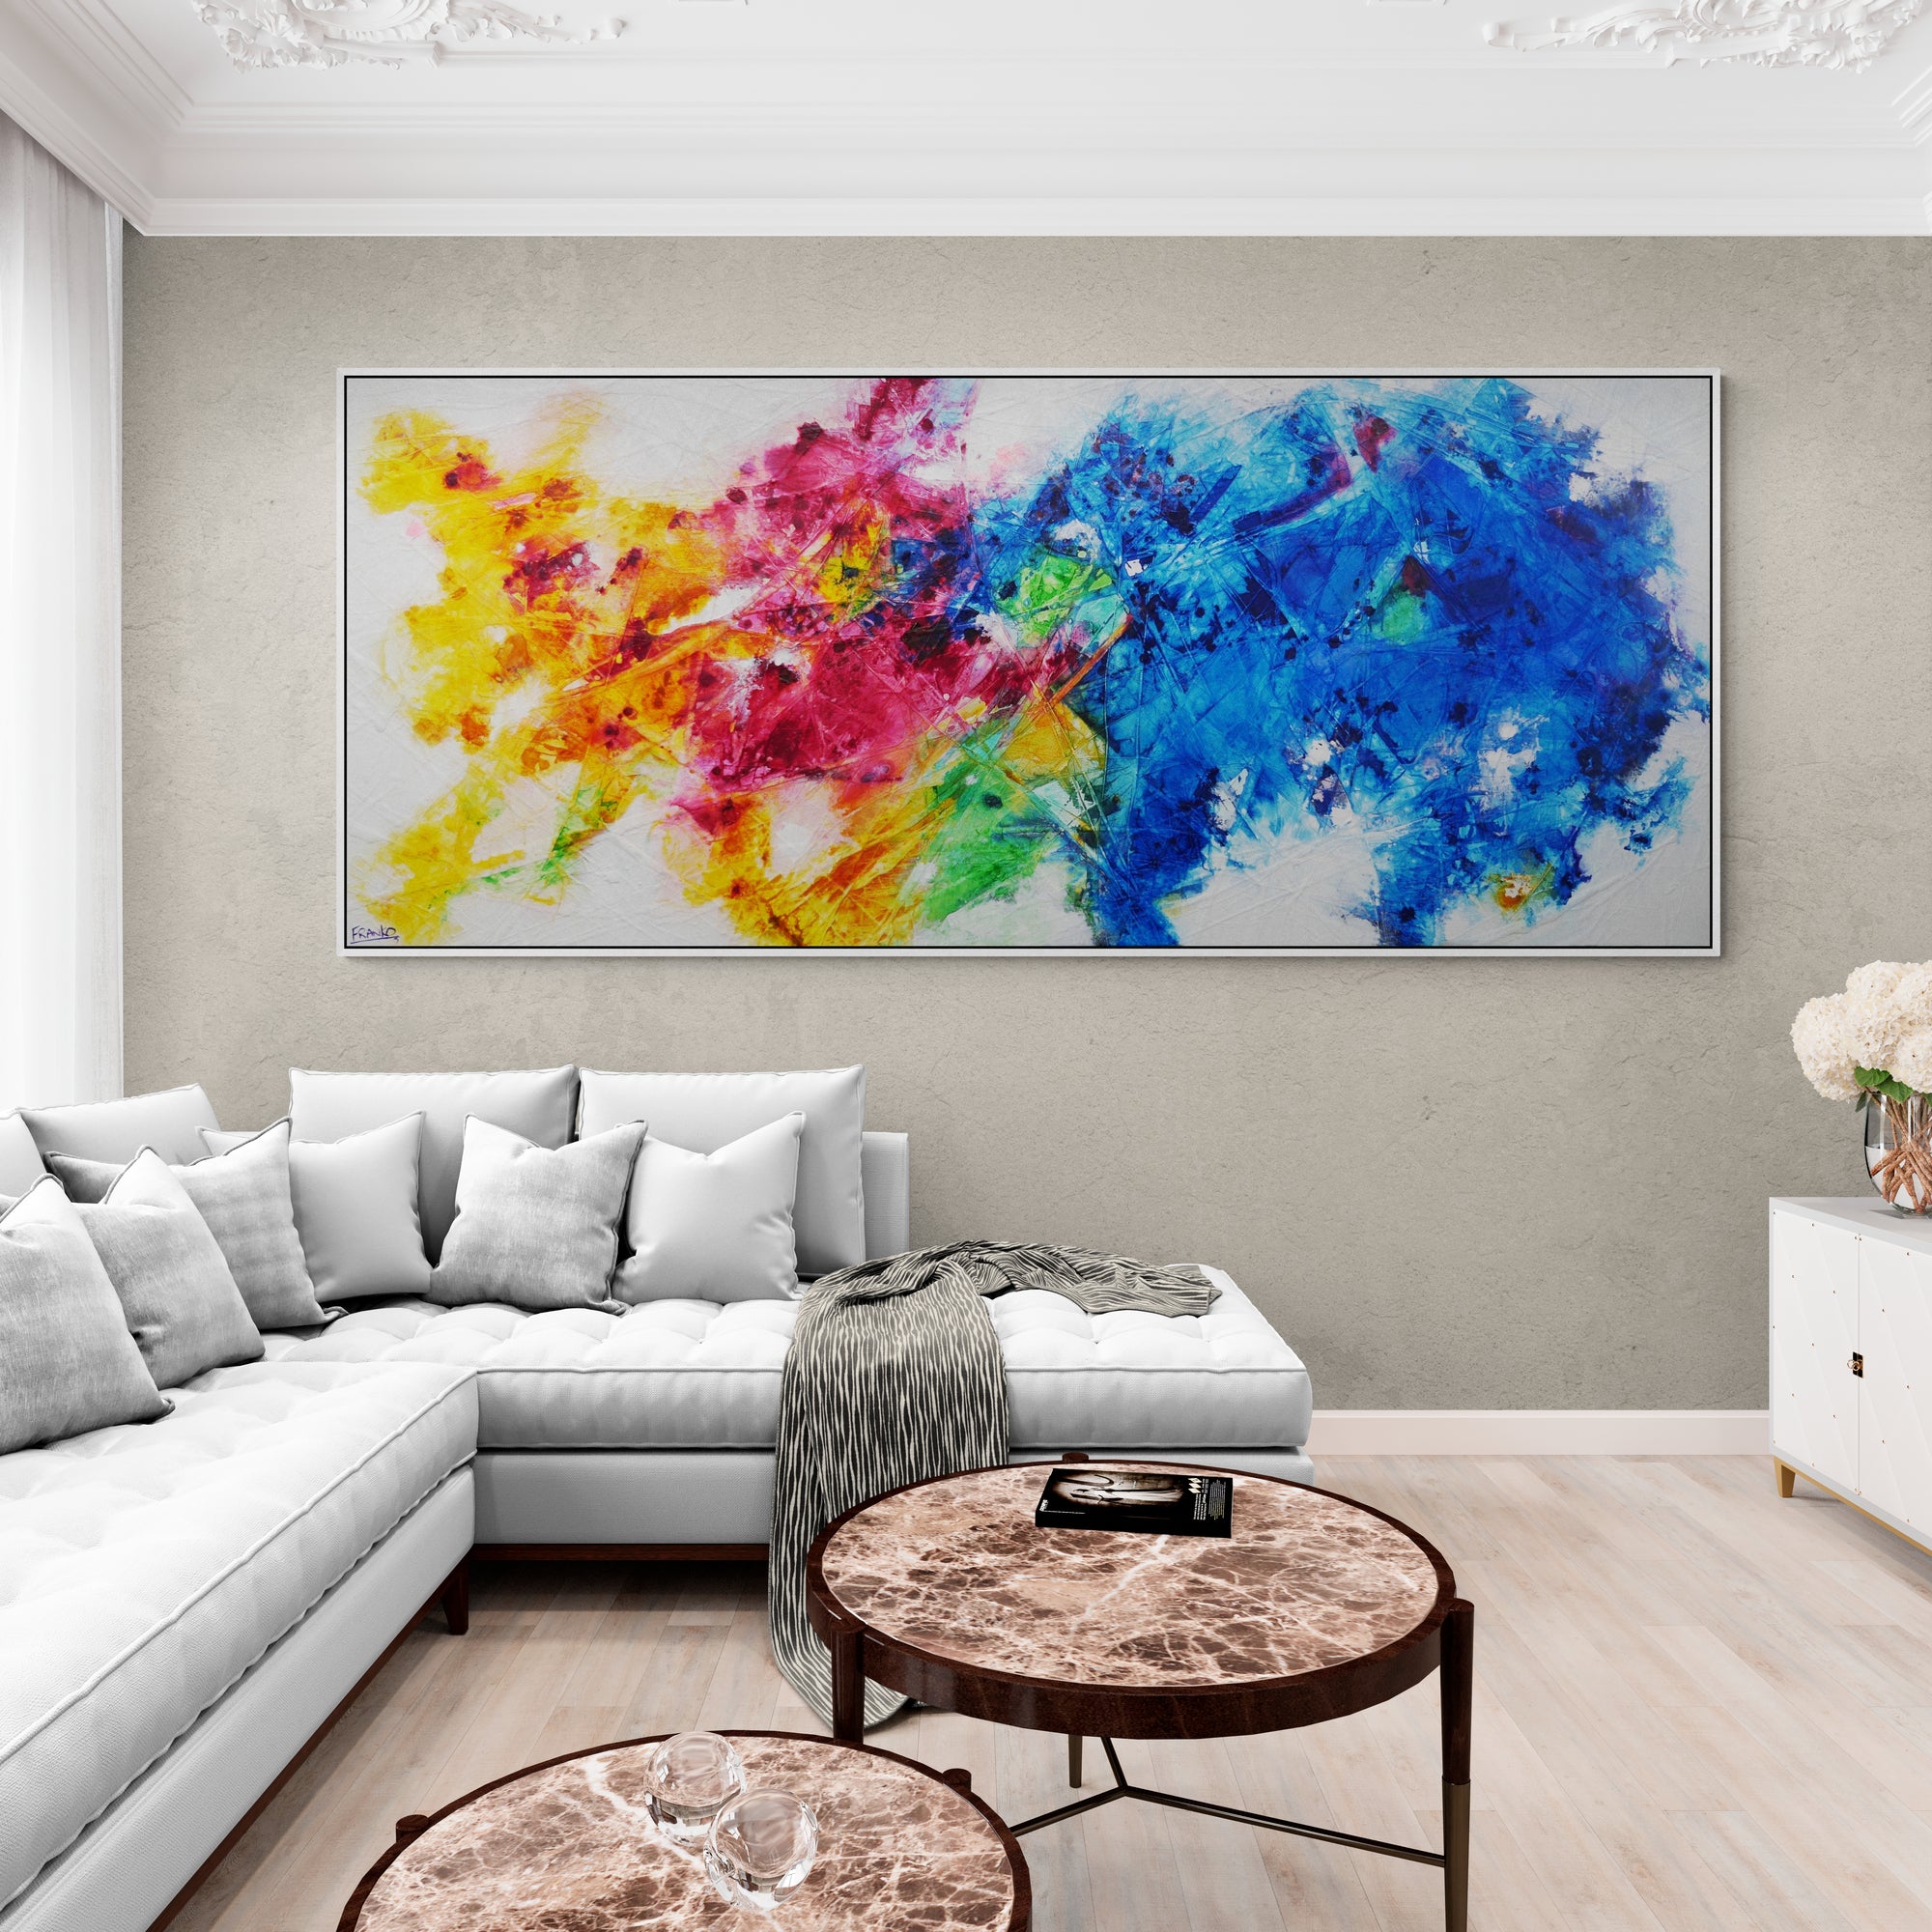 Colour Torque 240cm x 100cm Colourful Textured Abstract Painting